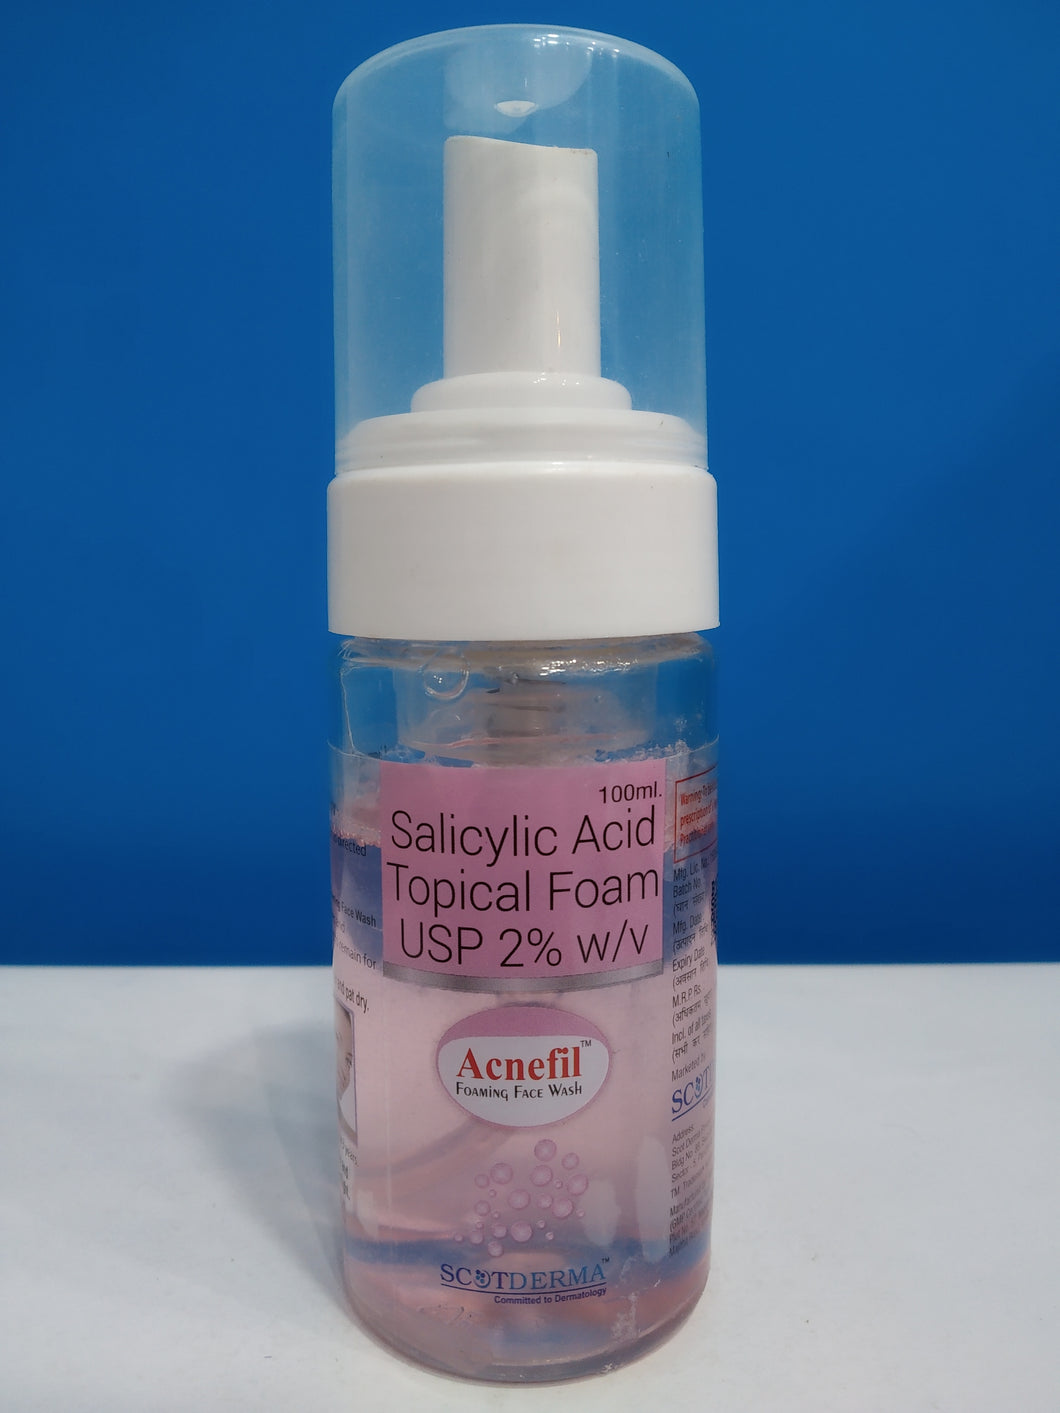 Acnefil Foaming Face Wash (100ml)